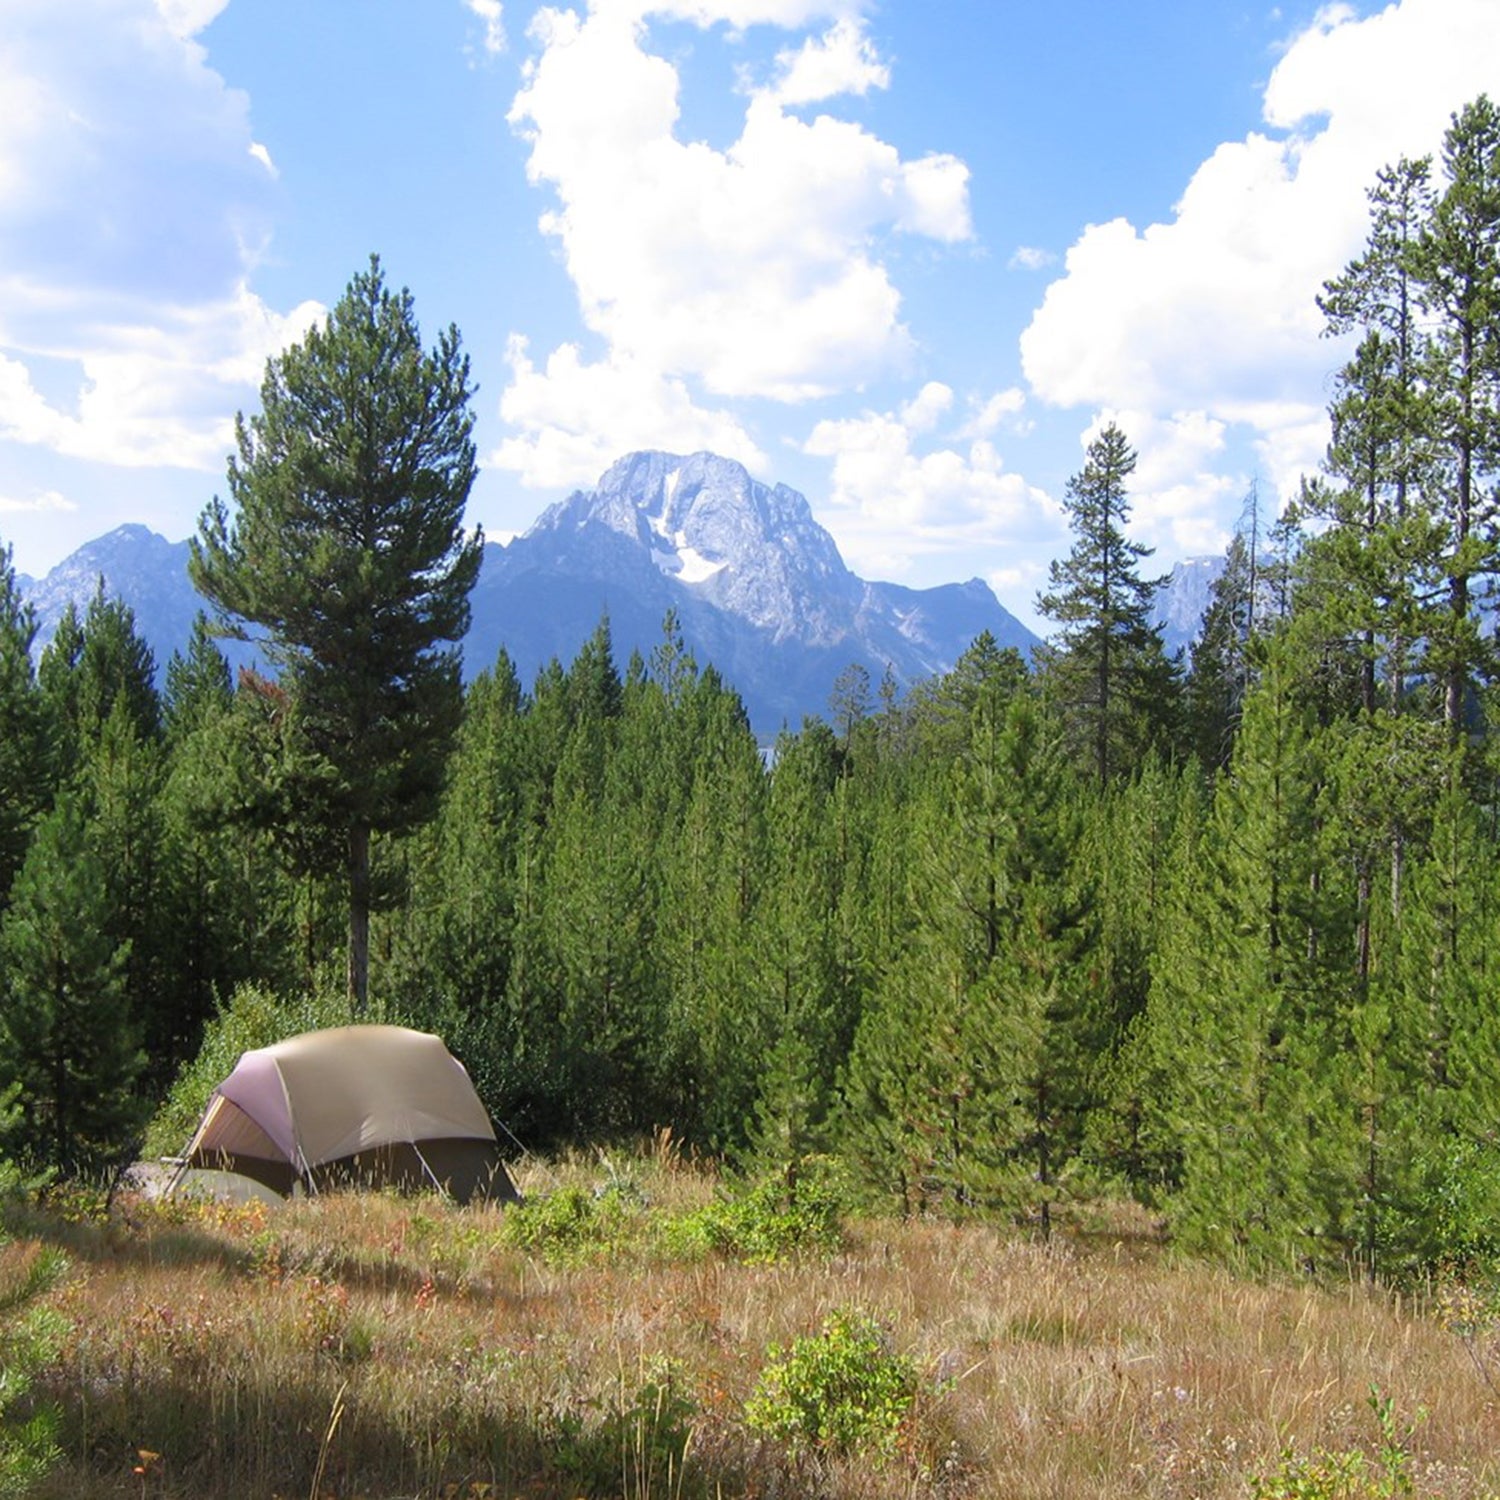 How to Book the Best Campsites in National Parks